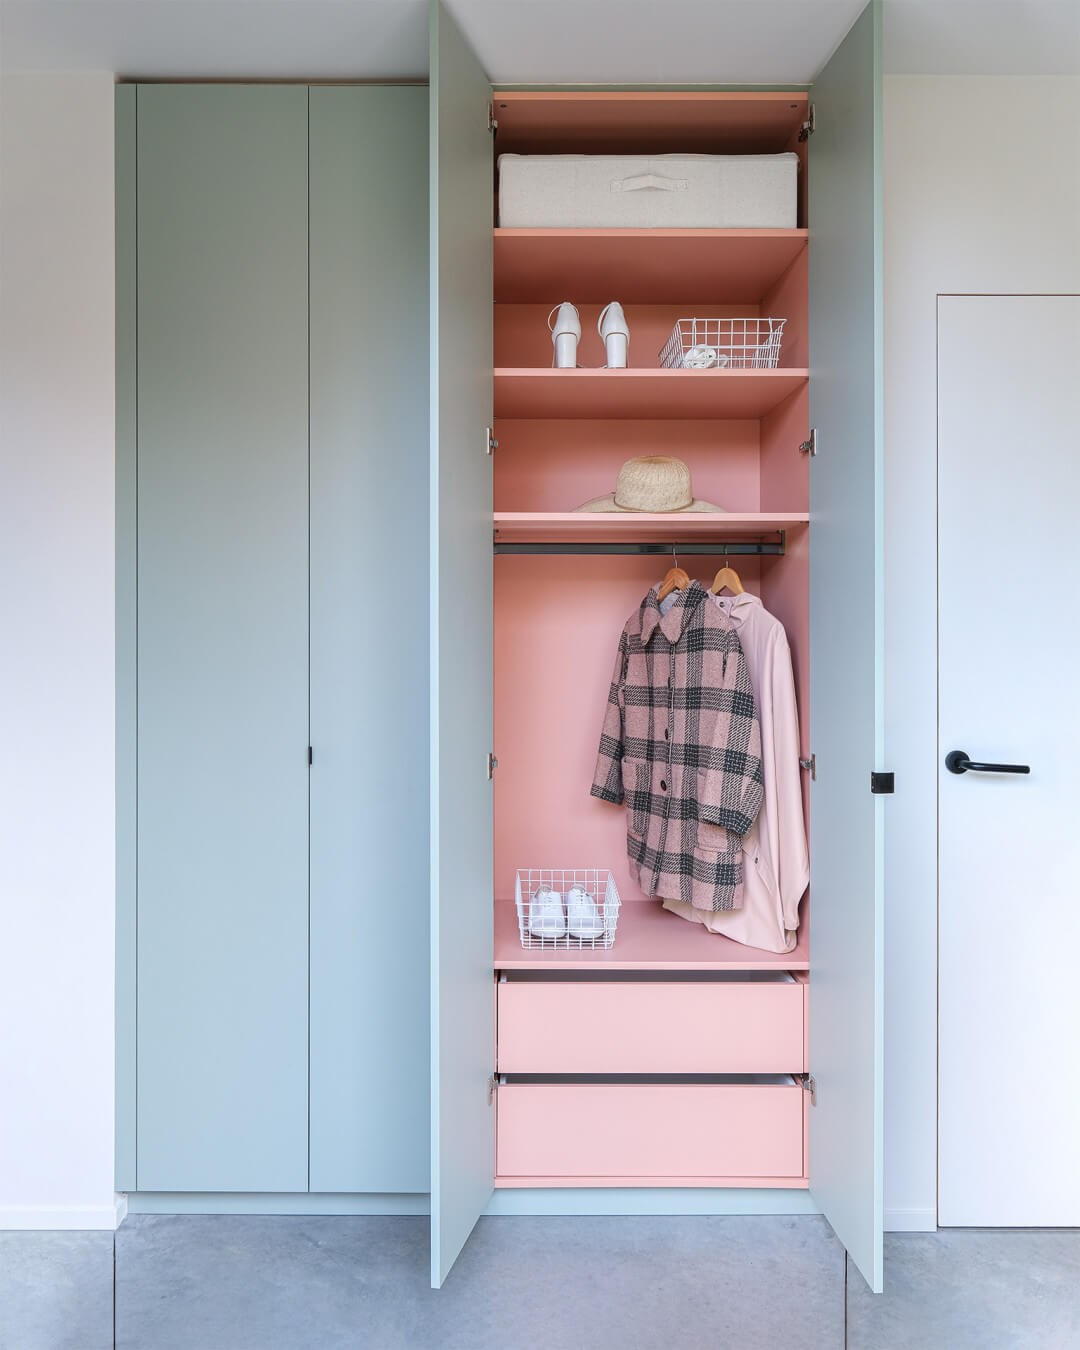 Custom hall closet in industrial green with a pink interior